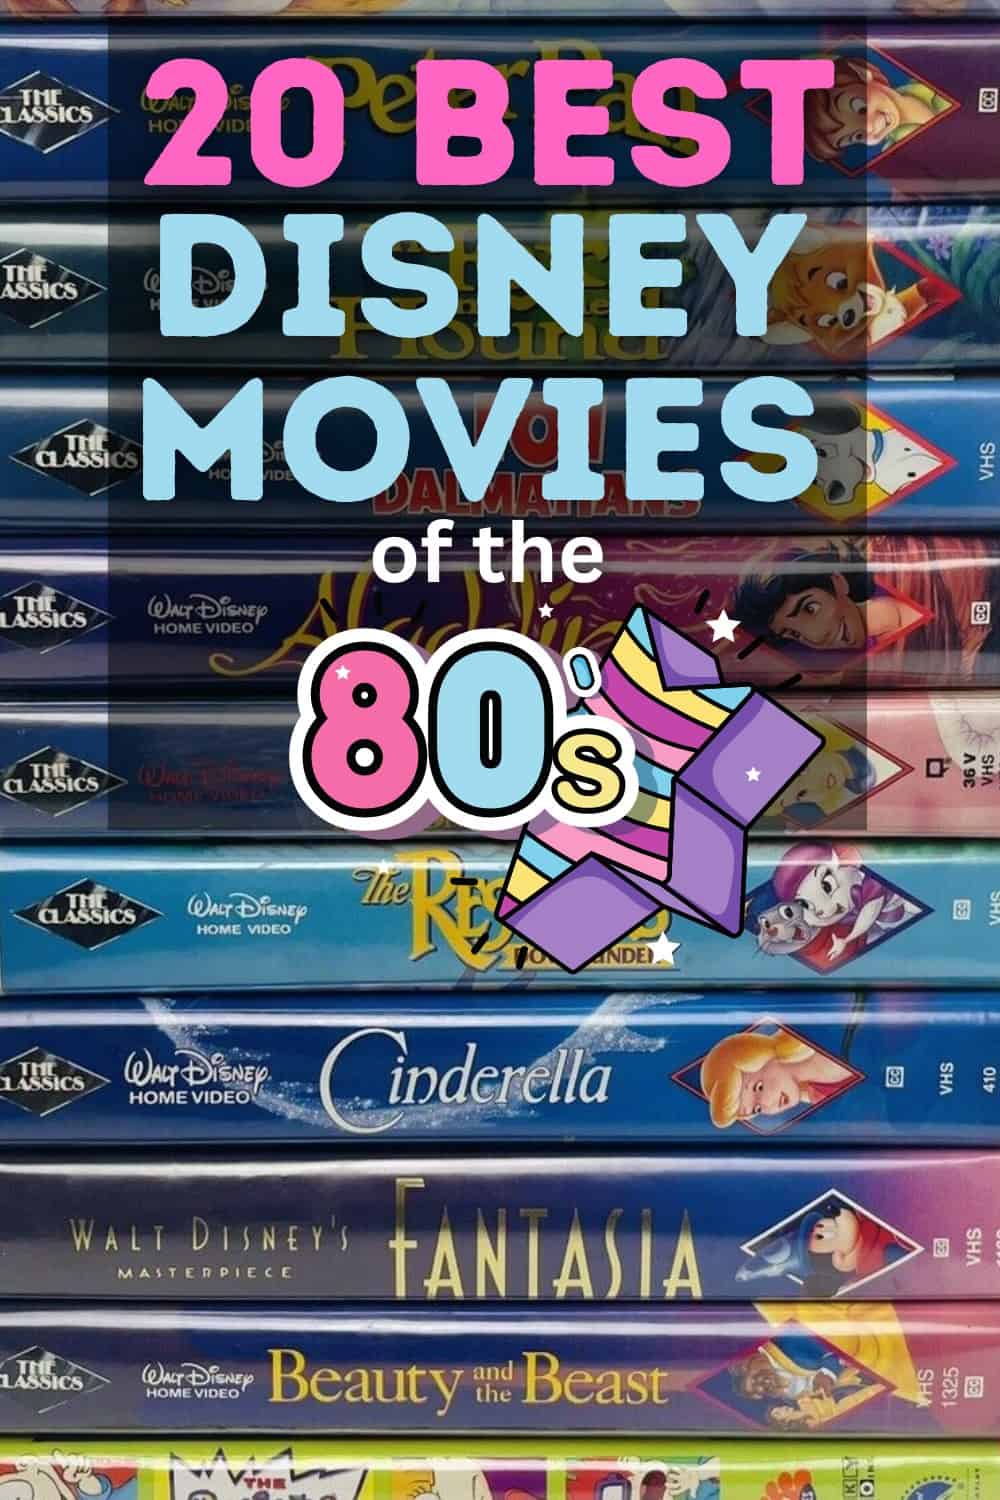 What are the best Disney movies of the 80s?